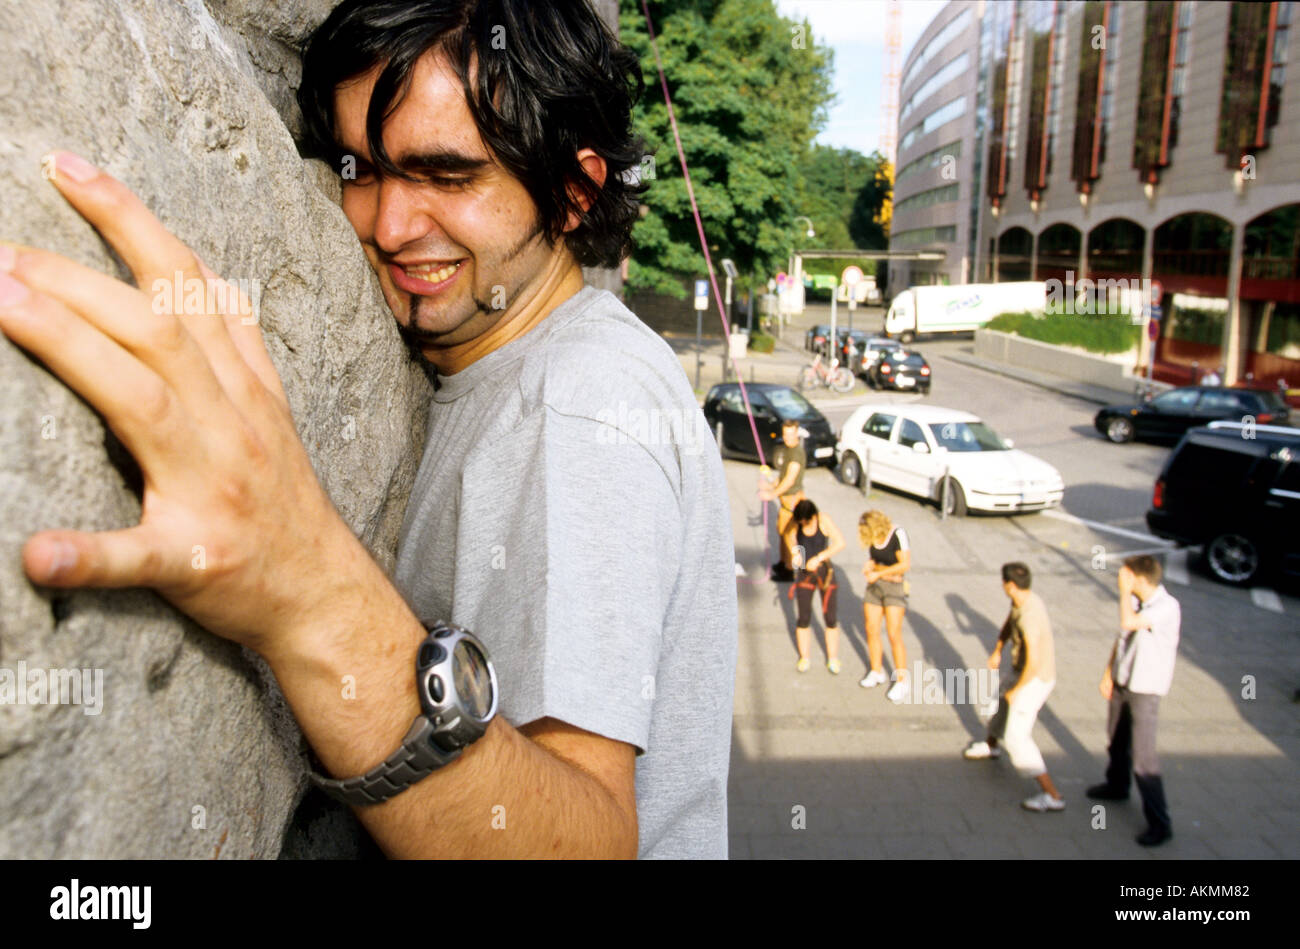 Germany Free time Young man climbing  Stock Photo